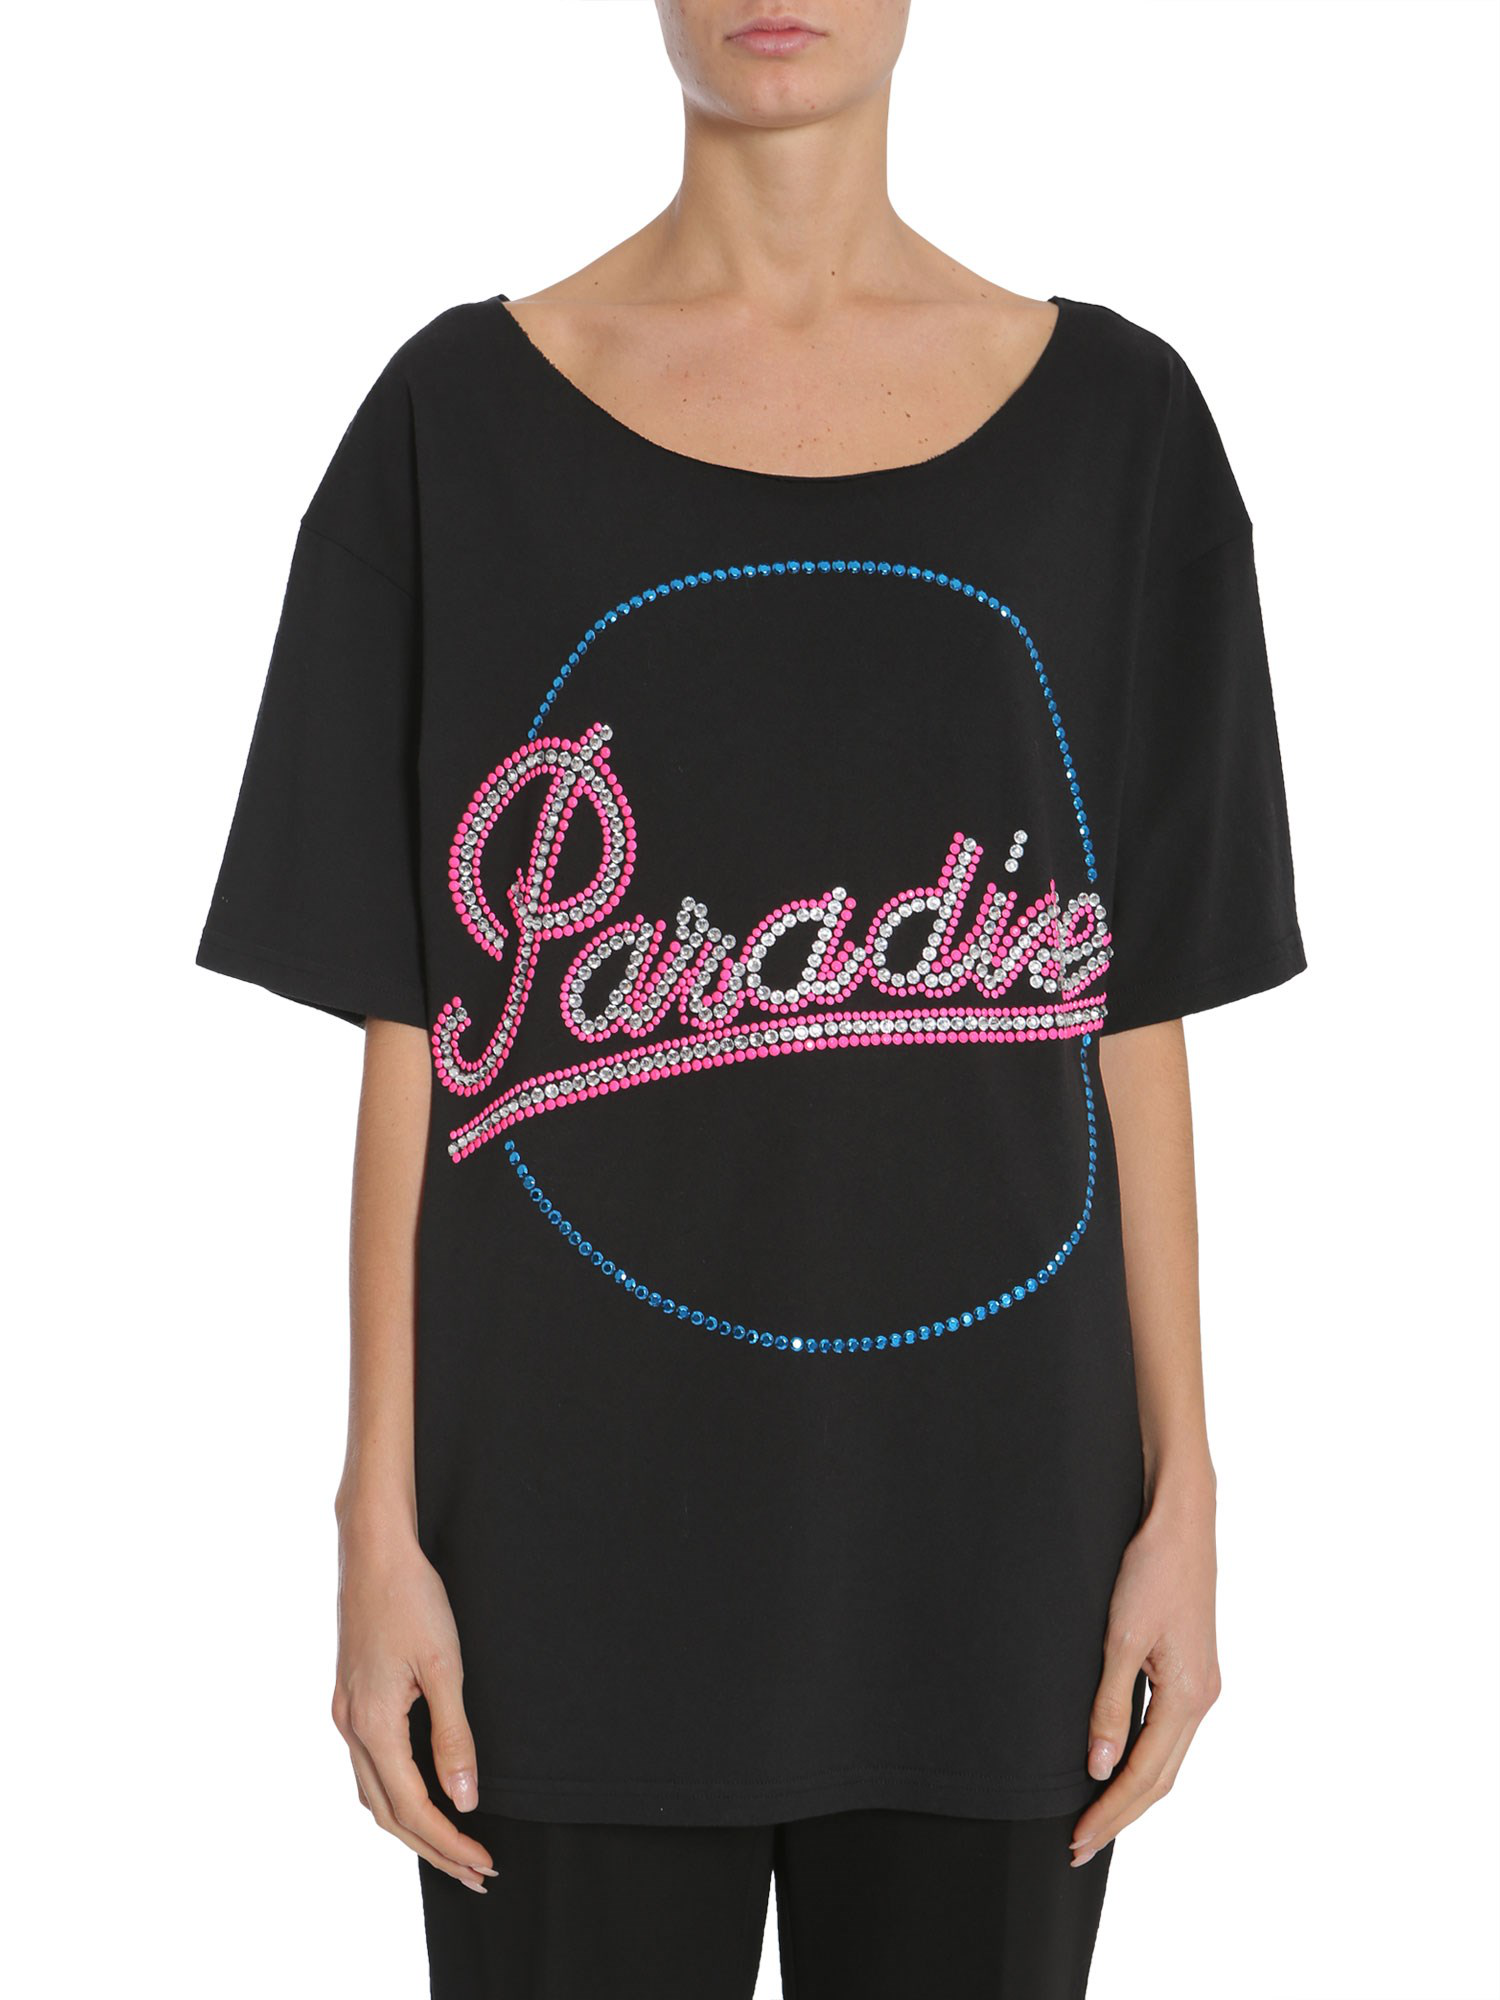 Womens Black Jersey Crystal Embellished T-Shirt by Nude 